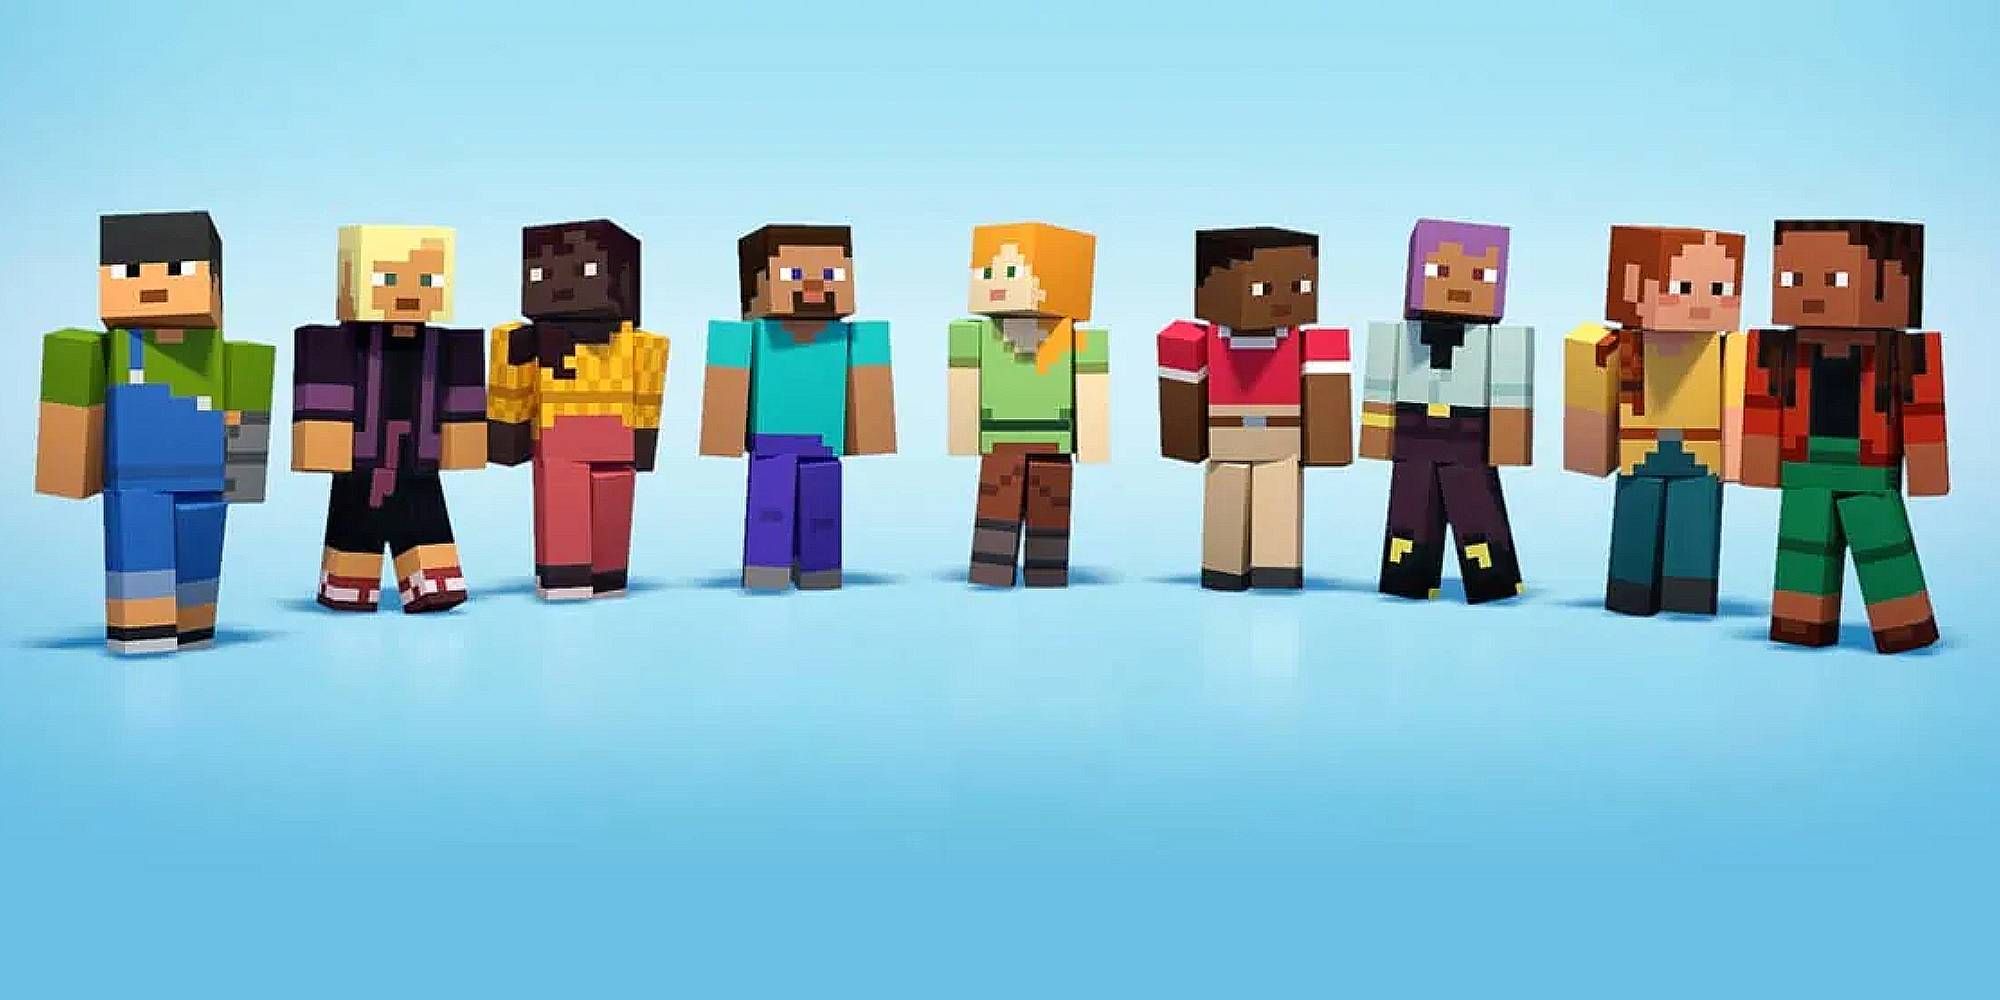 A host of Minecraft characters stand side by side